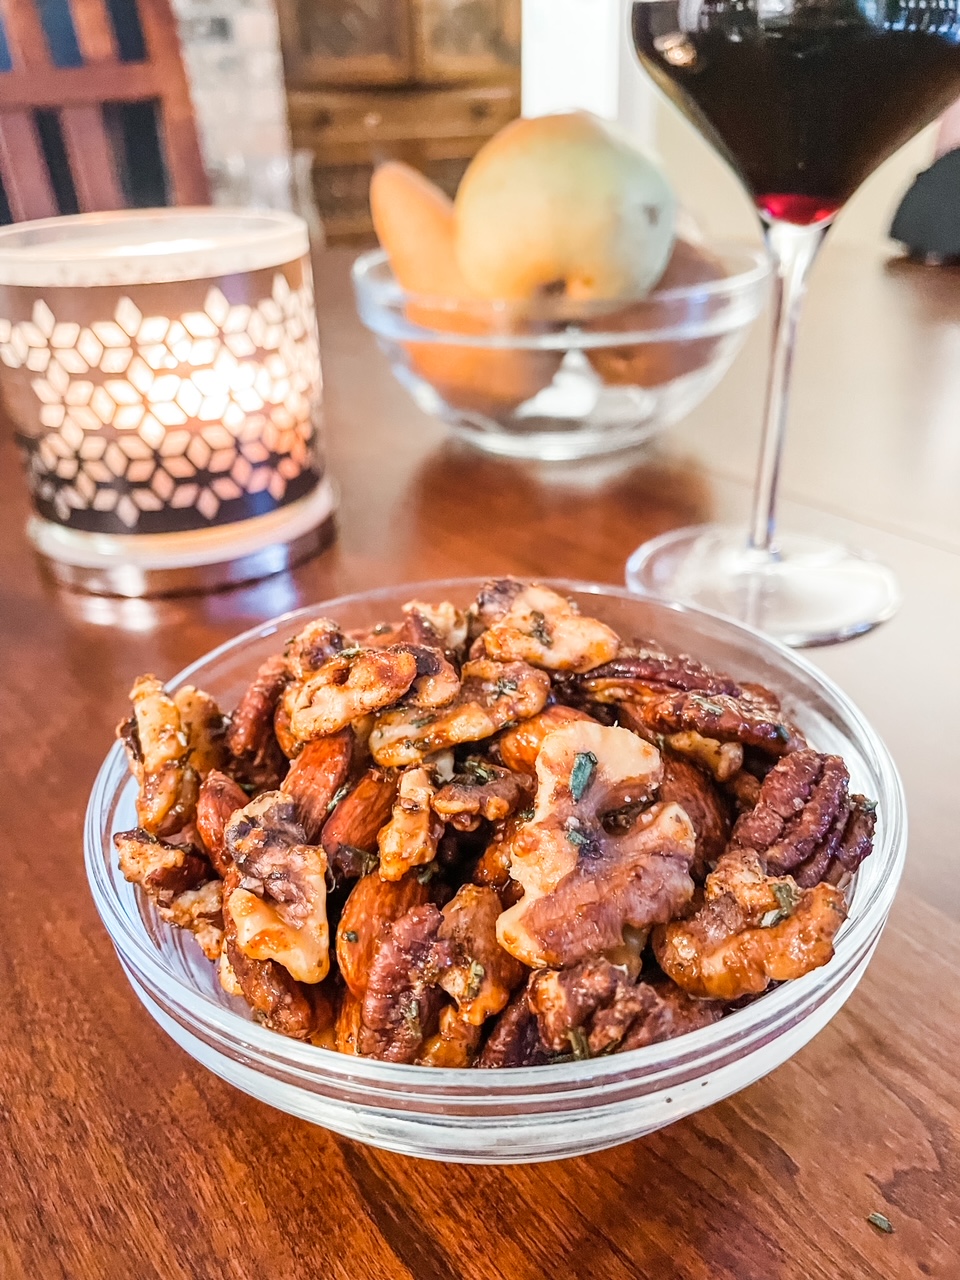 A bowl of the Rosemary Maple Spiced Nuts on a table next to a candle